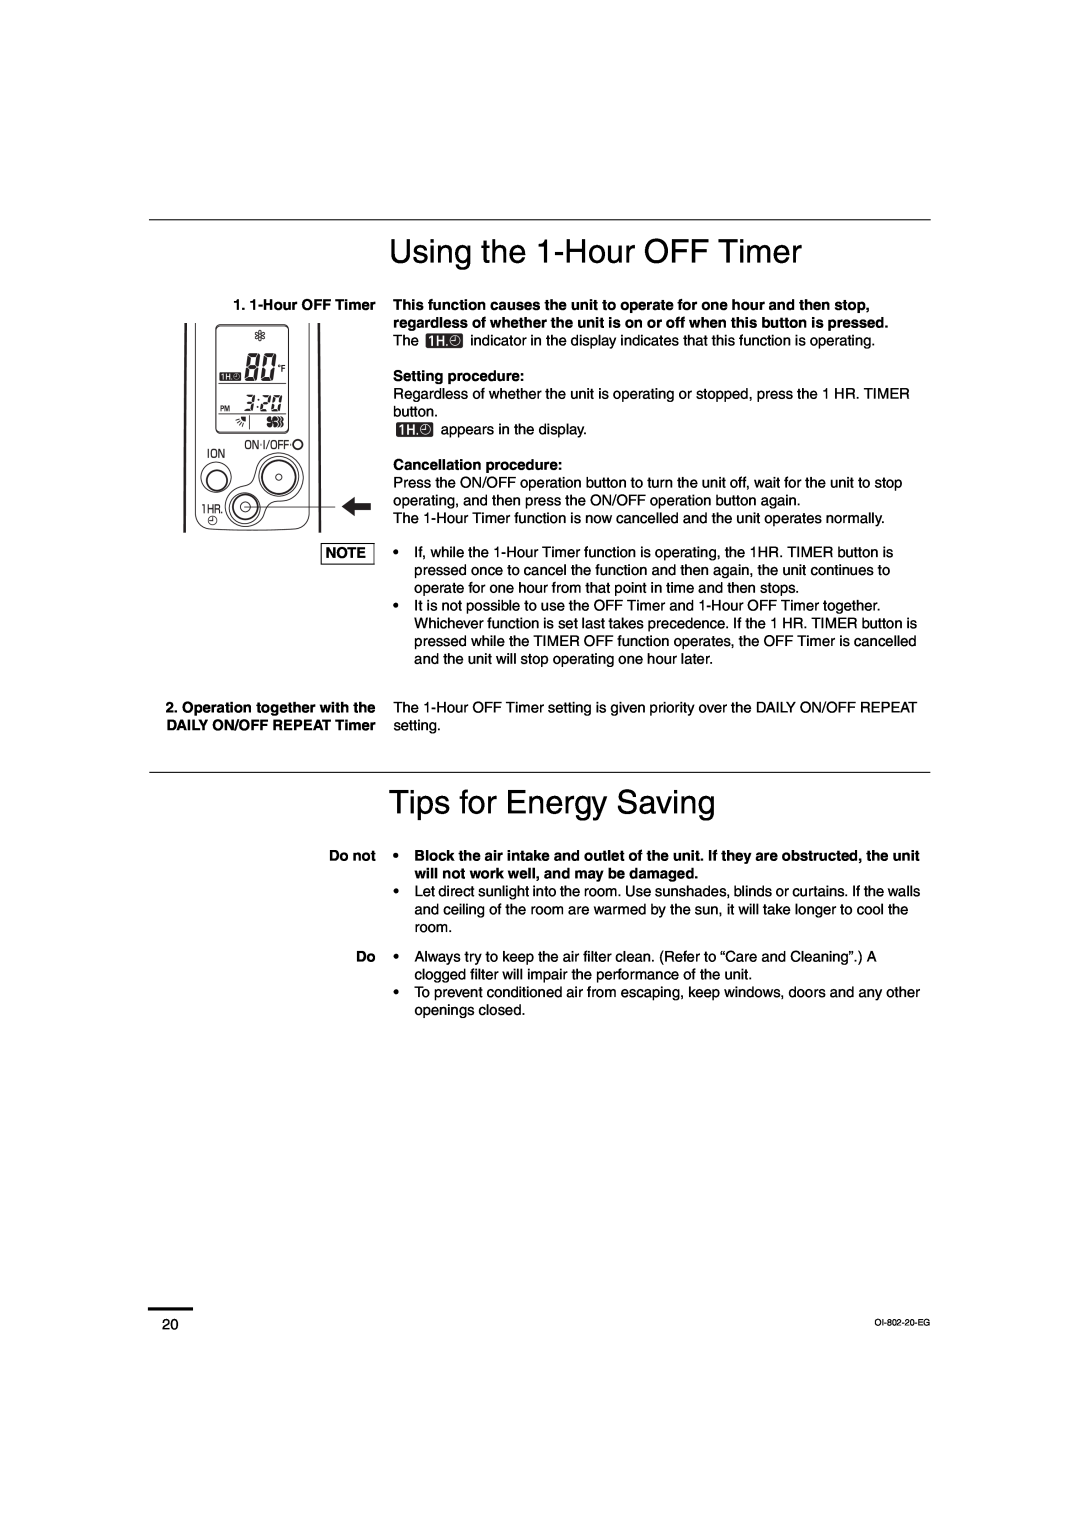 Sanyo CH0971, CH1271 service manual Using the 1-HourOFF Timer, Tips for Energy Saving 